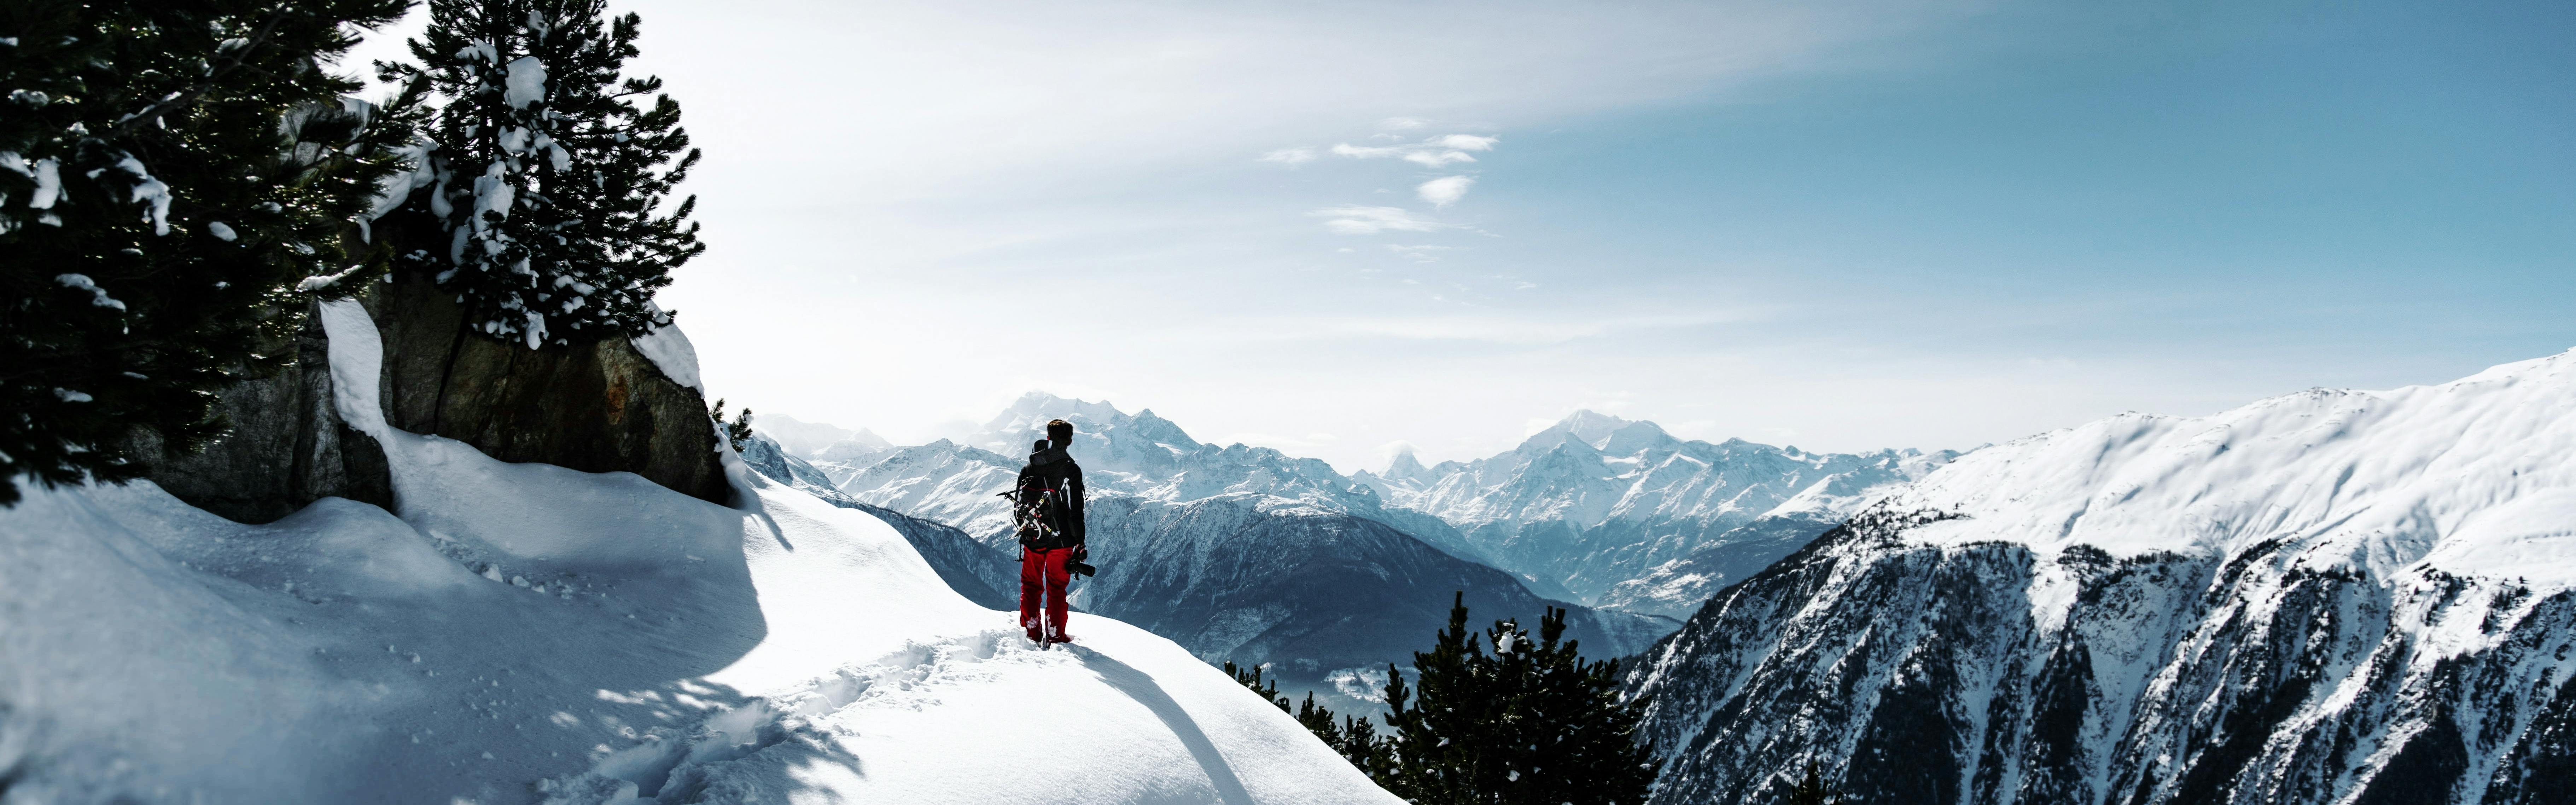 A man stands on a snowy trail that overlooks snowy peaks.